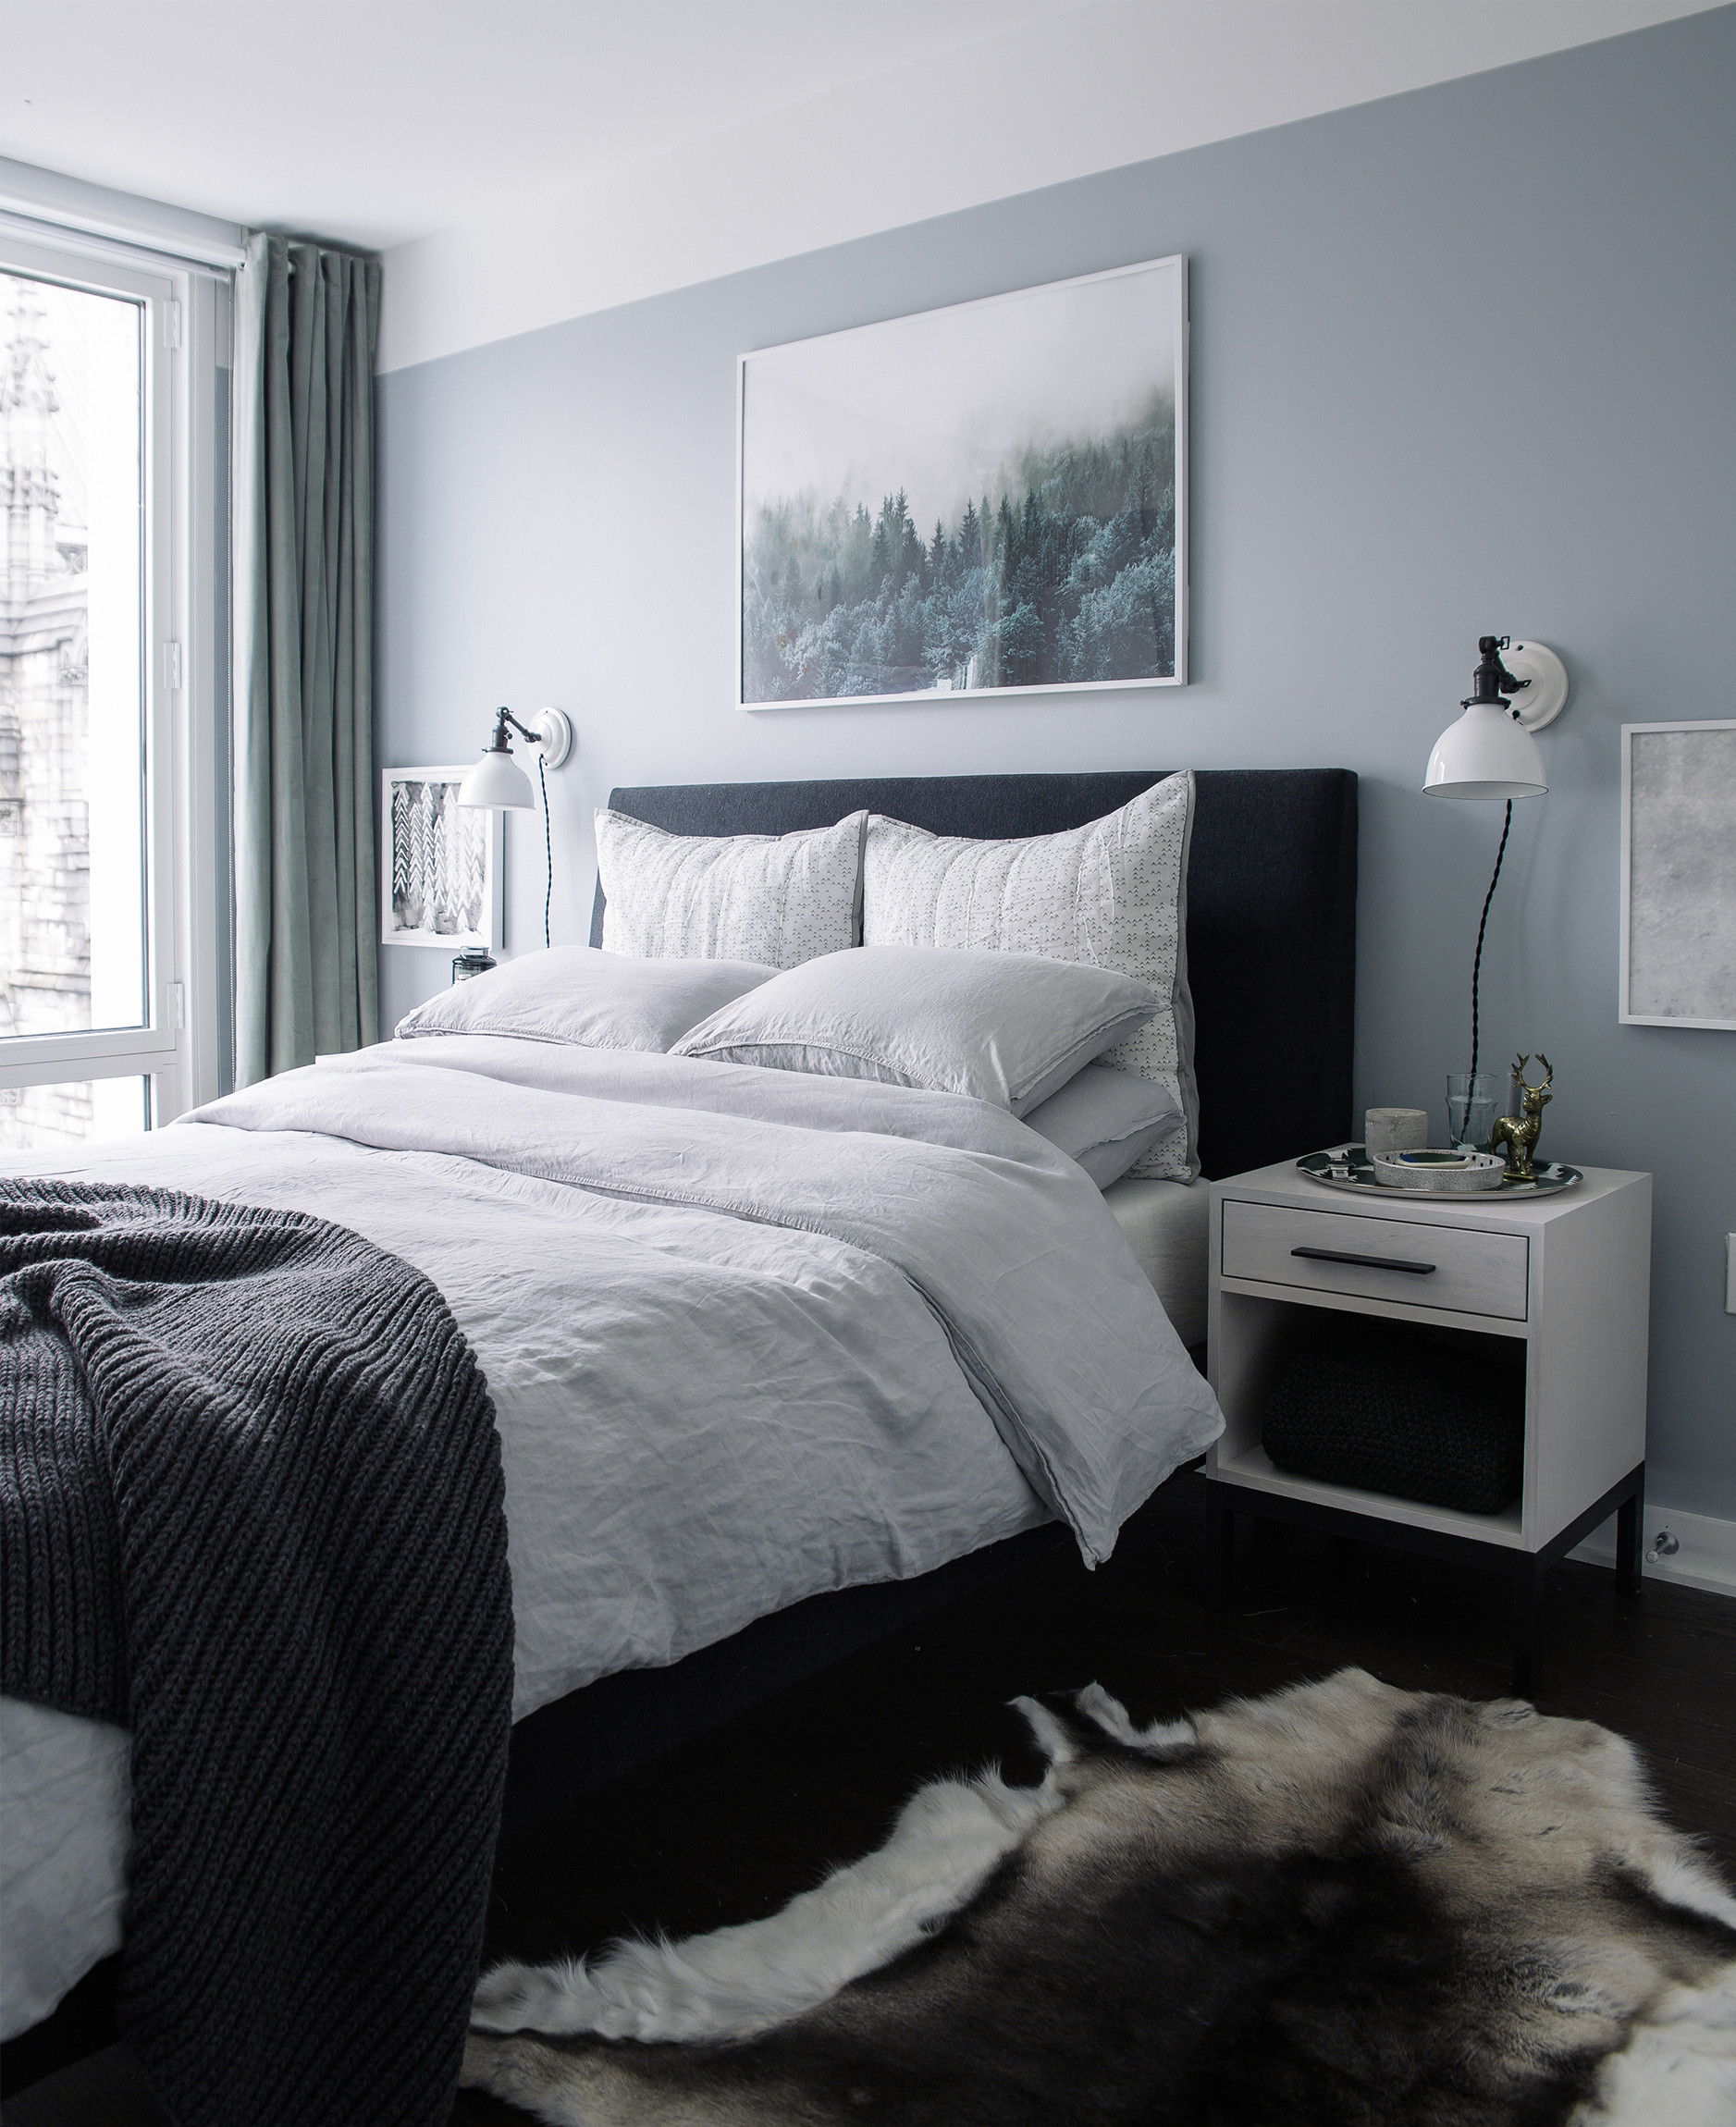 Gray Paint For Bedroom
 Bedroom Makeover The Reveal Bright Bazaar by Will Taylor